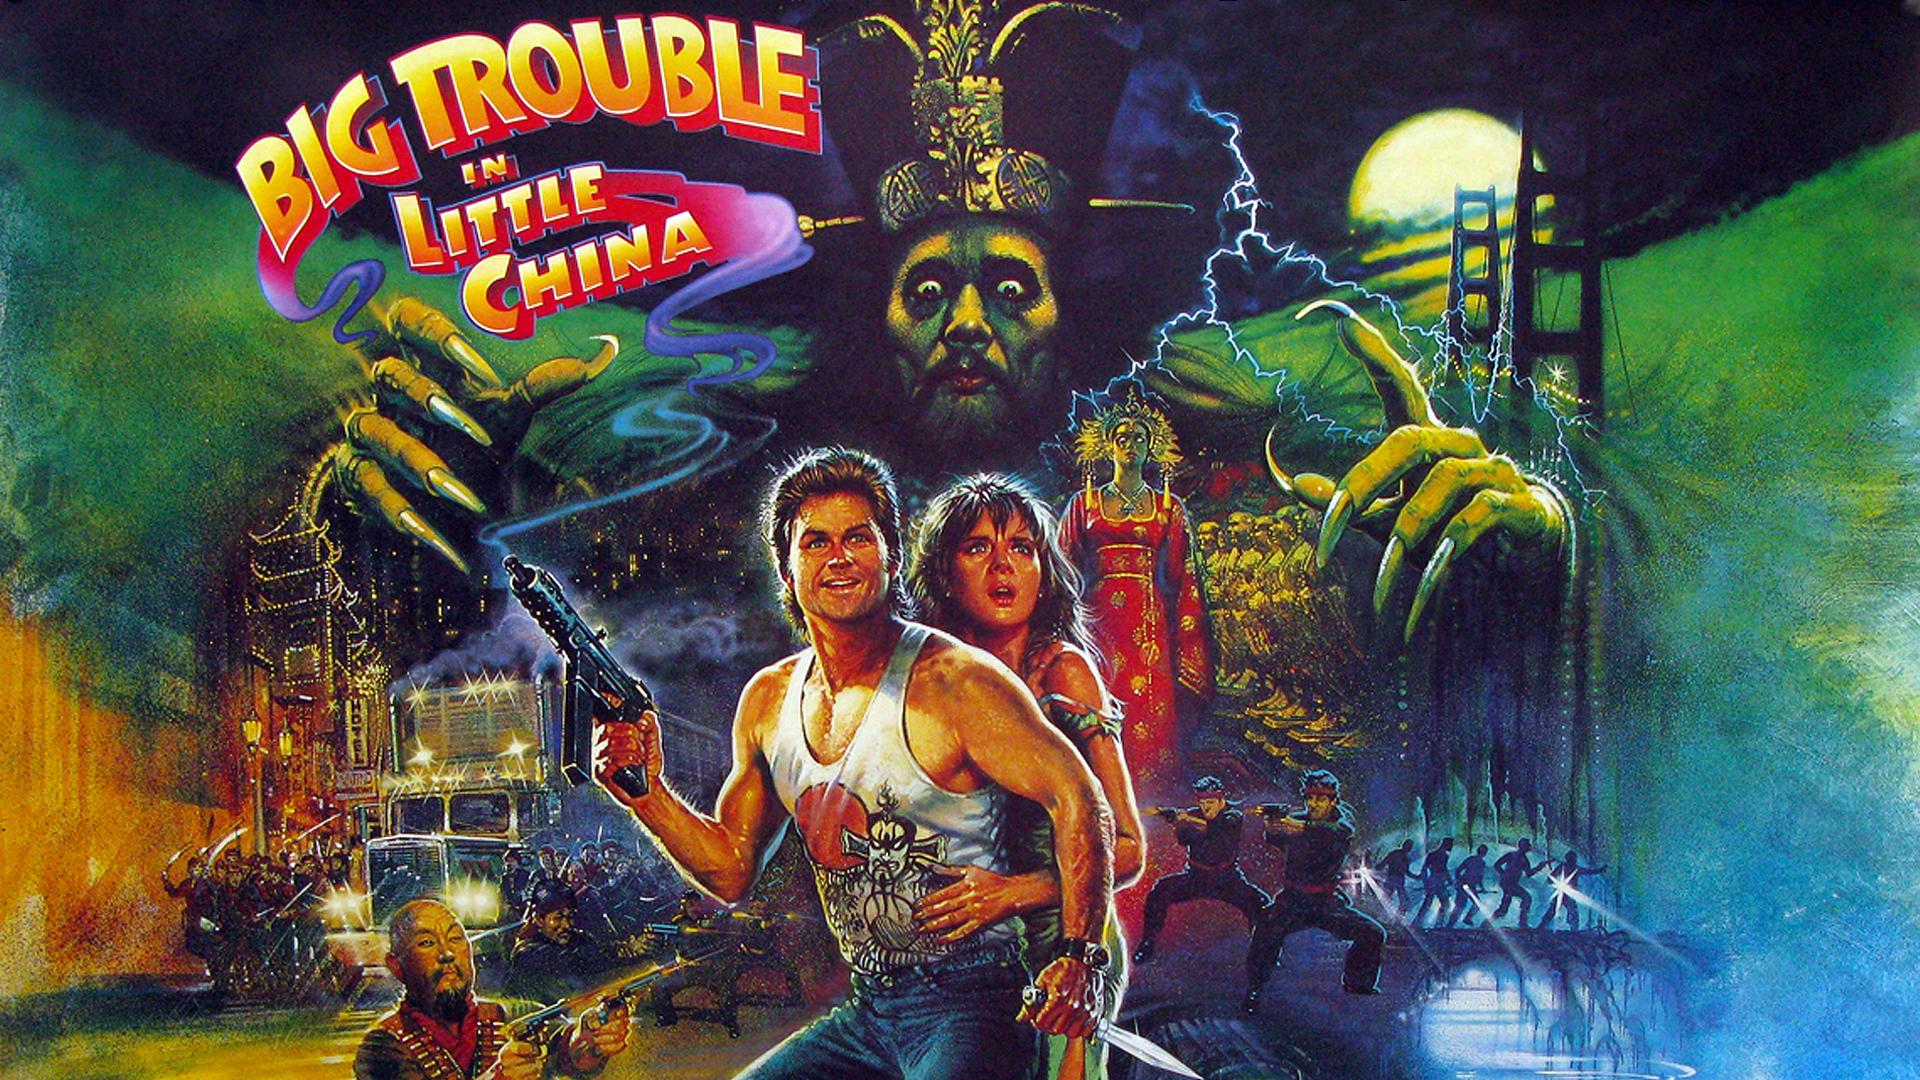 A Big Trouble In Little China Wallpaper .reddit.com